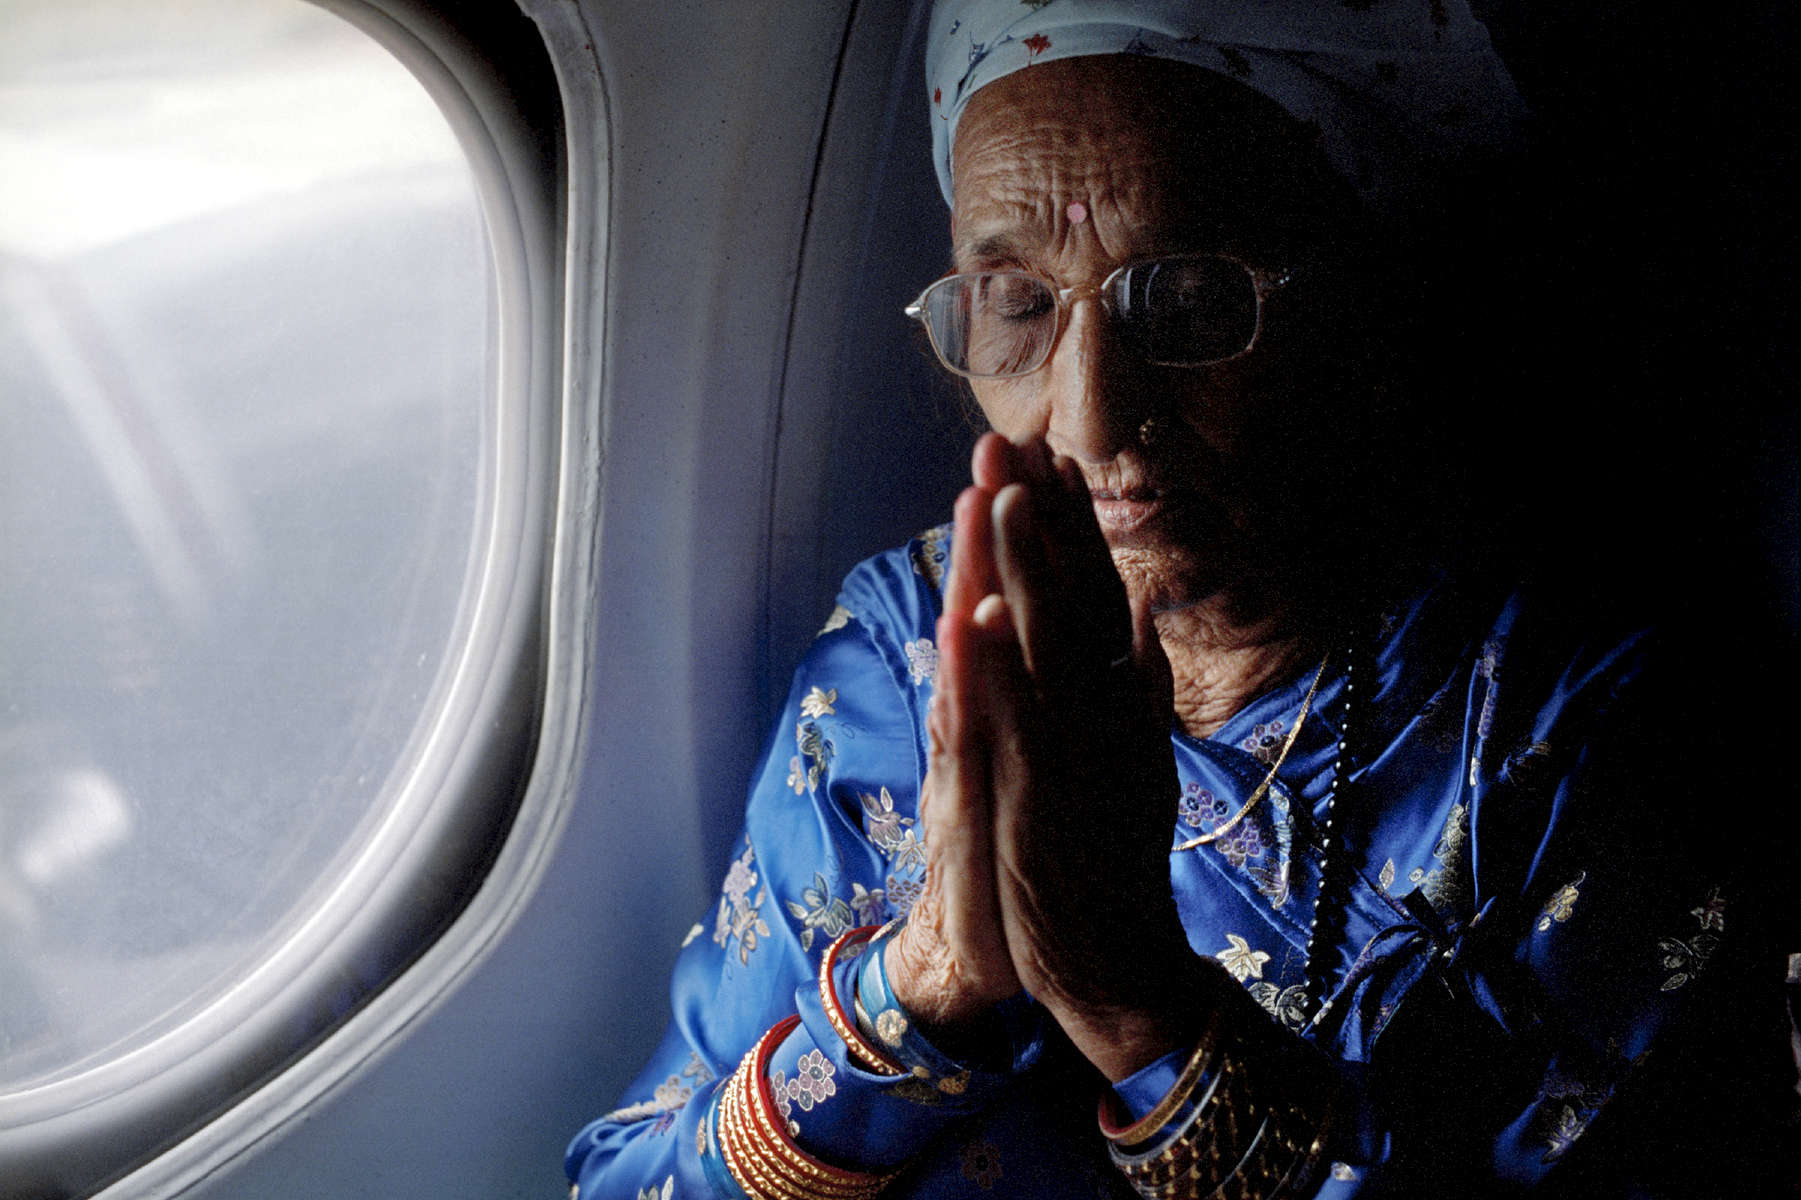 Radika s baptem. Radika mainali, in a plane for the first time in her life, praying before they take off. August 2009.